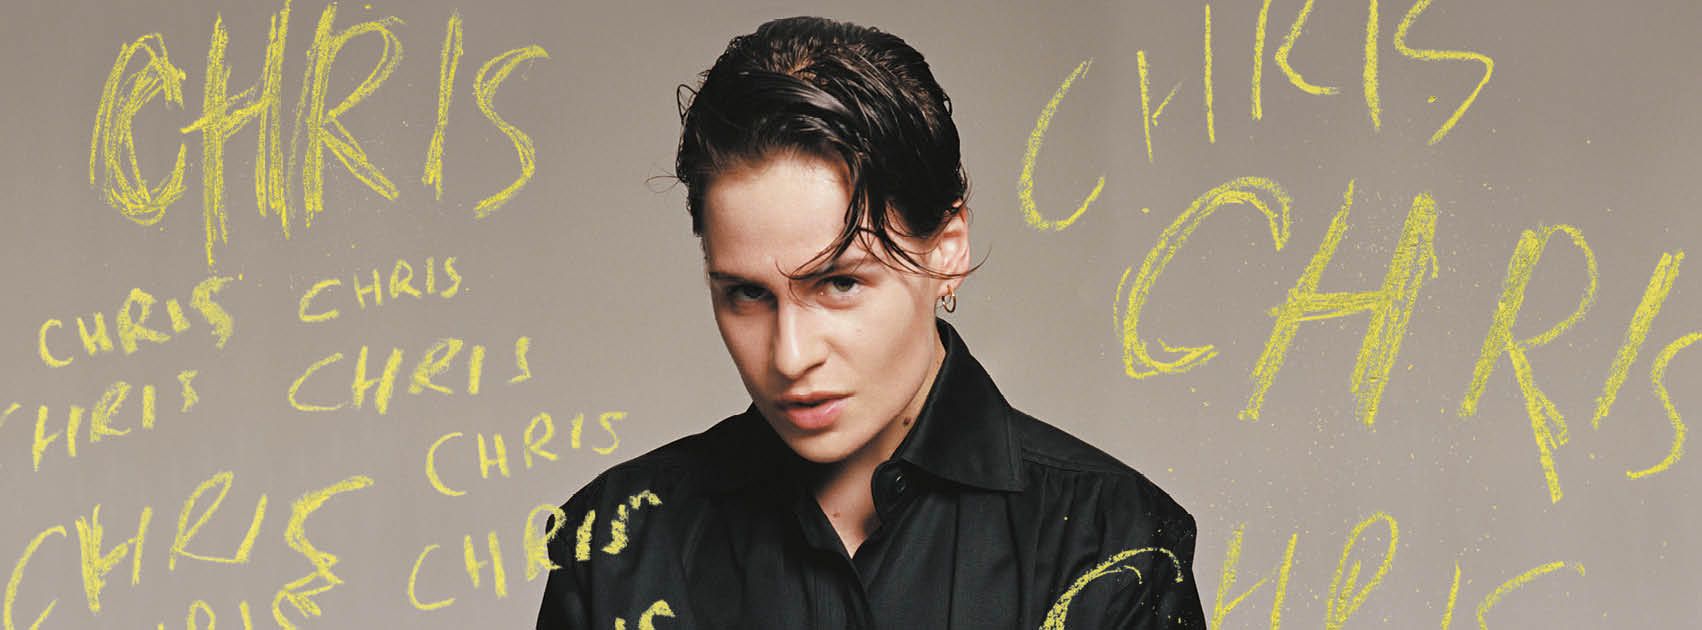 Christine and the Queens gets the best of both languages in ‘Chris’